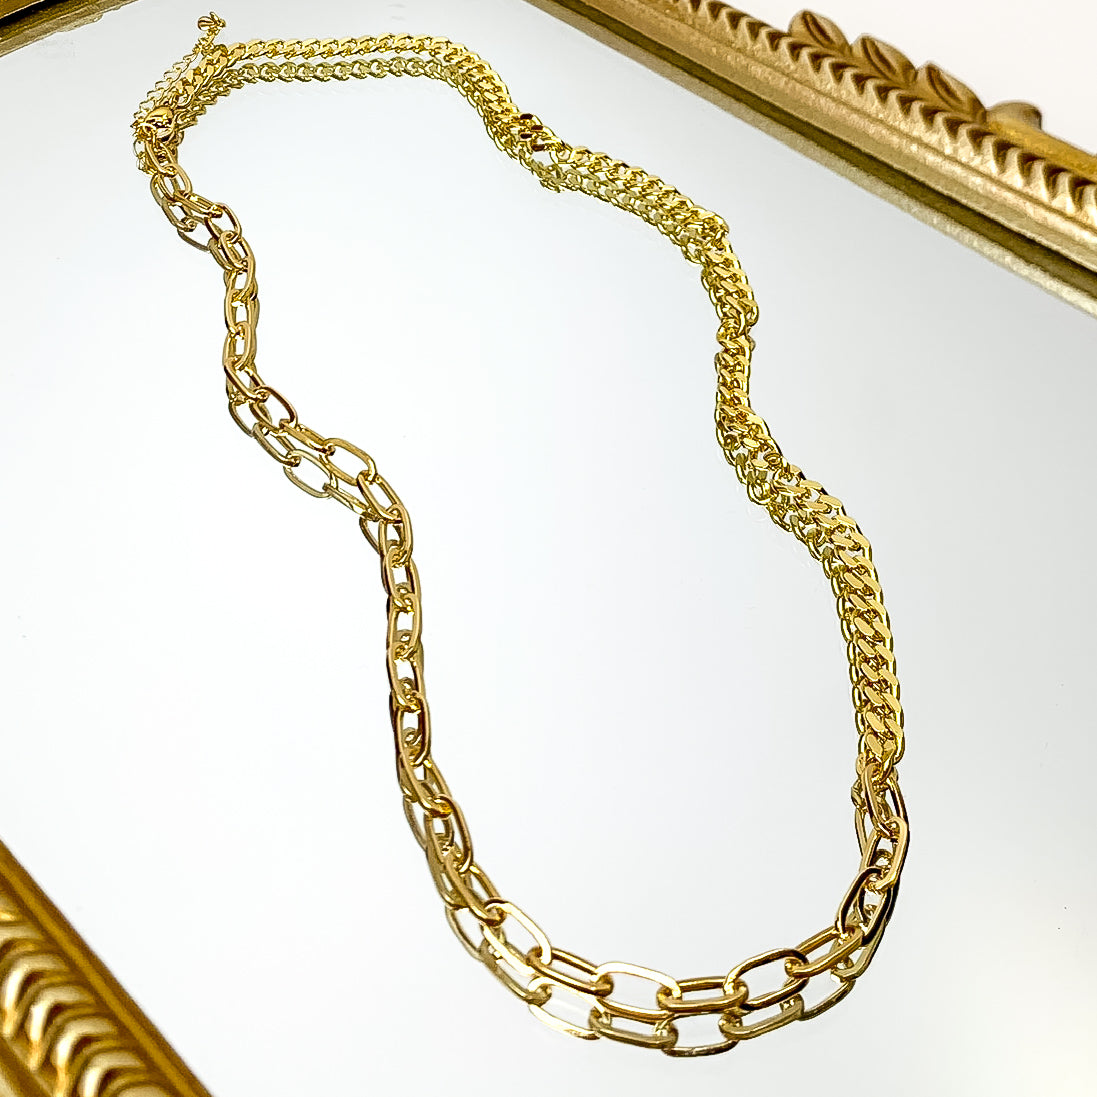 Kinsey Designs | Saxon Chain Necklace in Gold Tone - Giddy Up Glamour Boutique